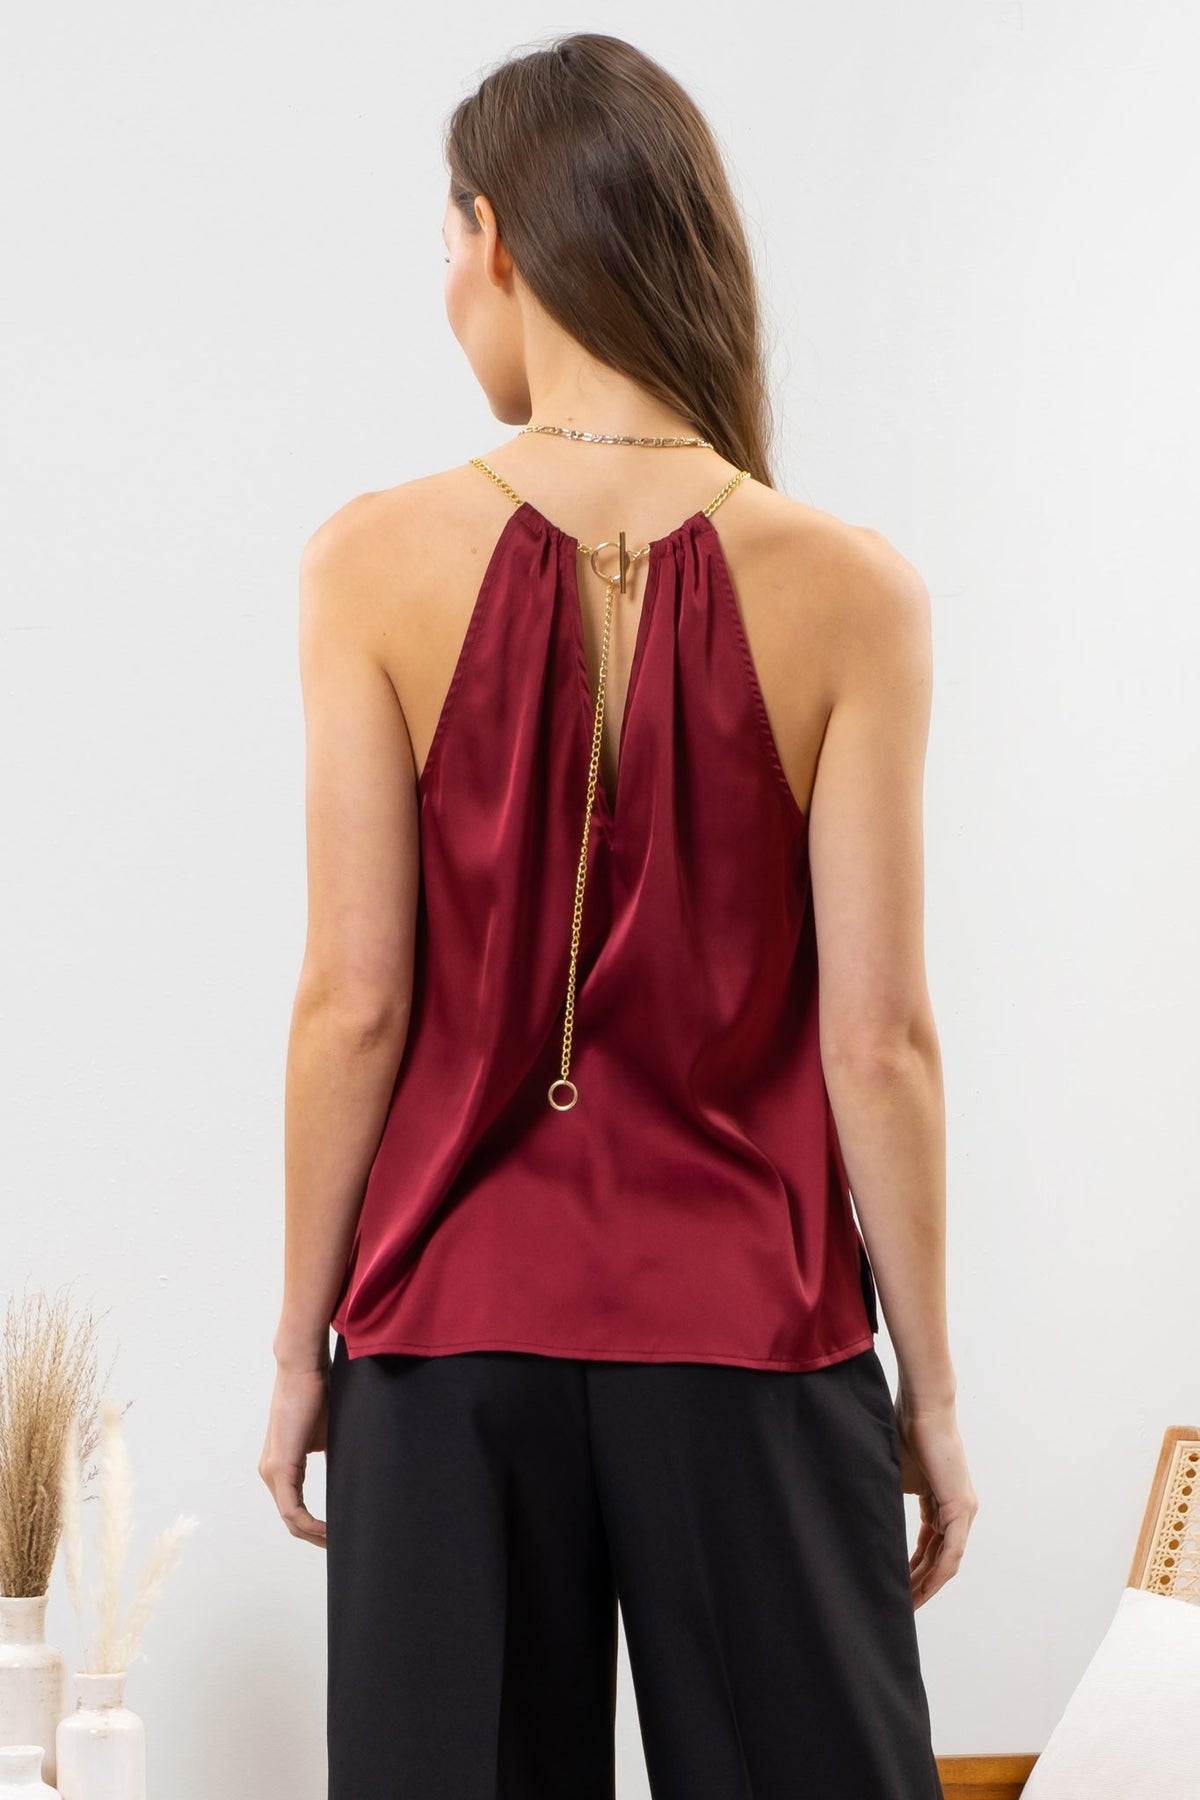 Chained Halter Top - 580 Threads